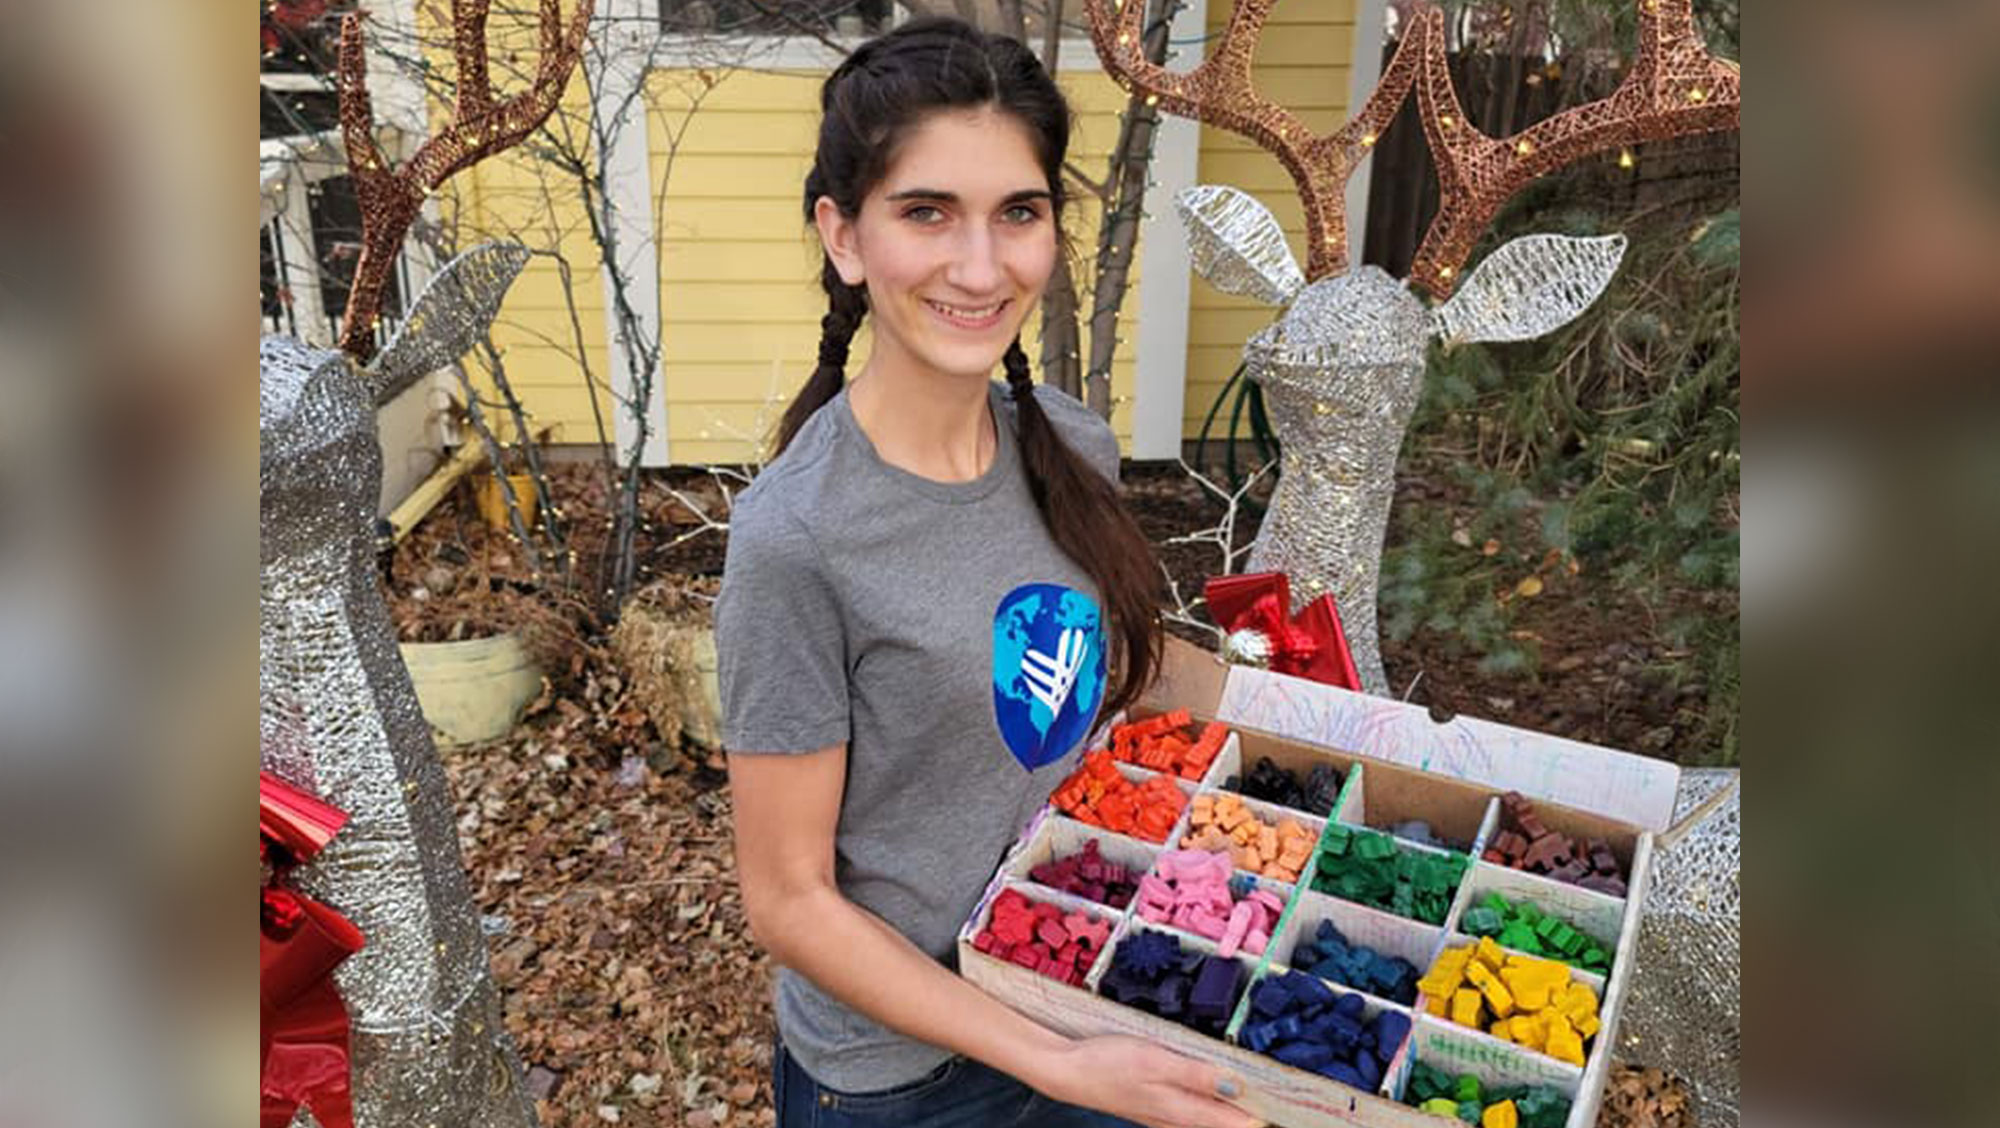 Abby Neff posing with a box of crayons she created through her nonprofit Recycled Rainbows.